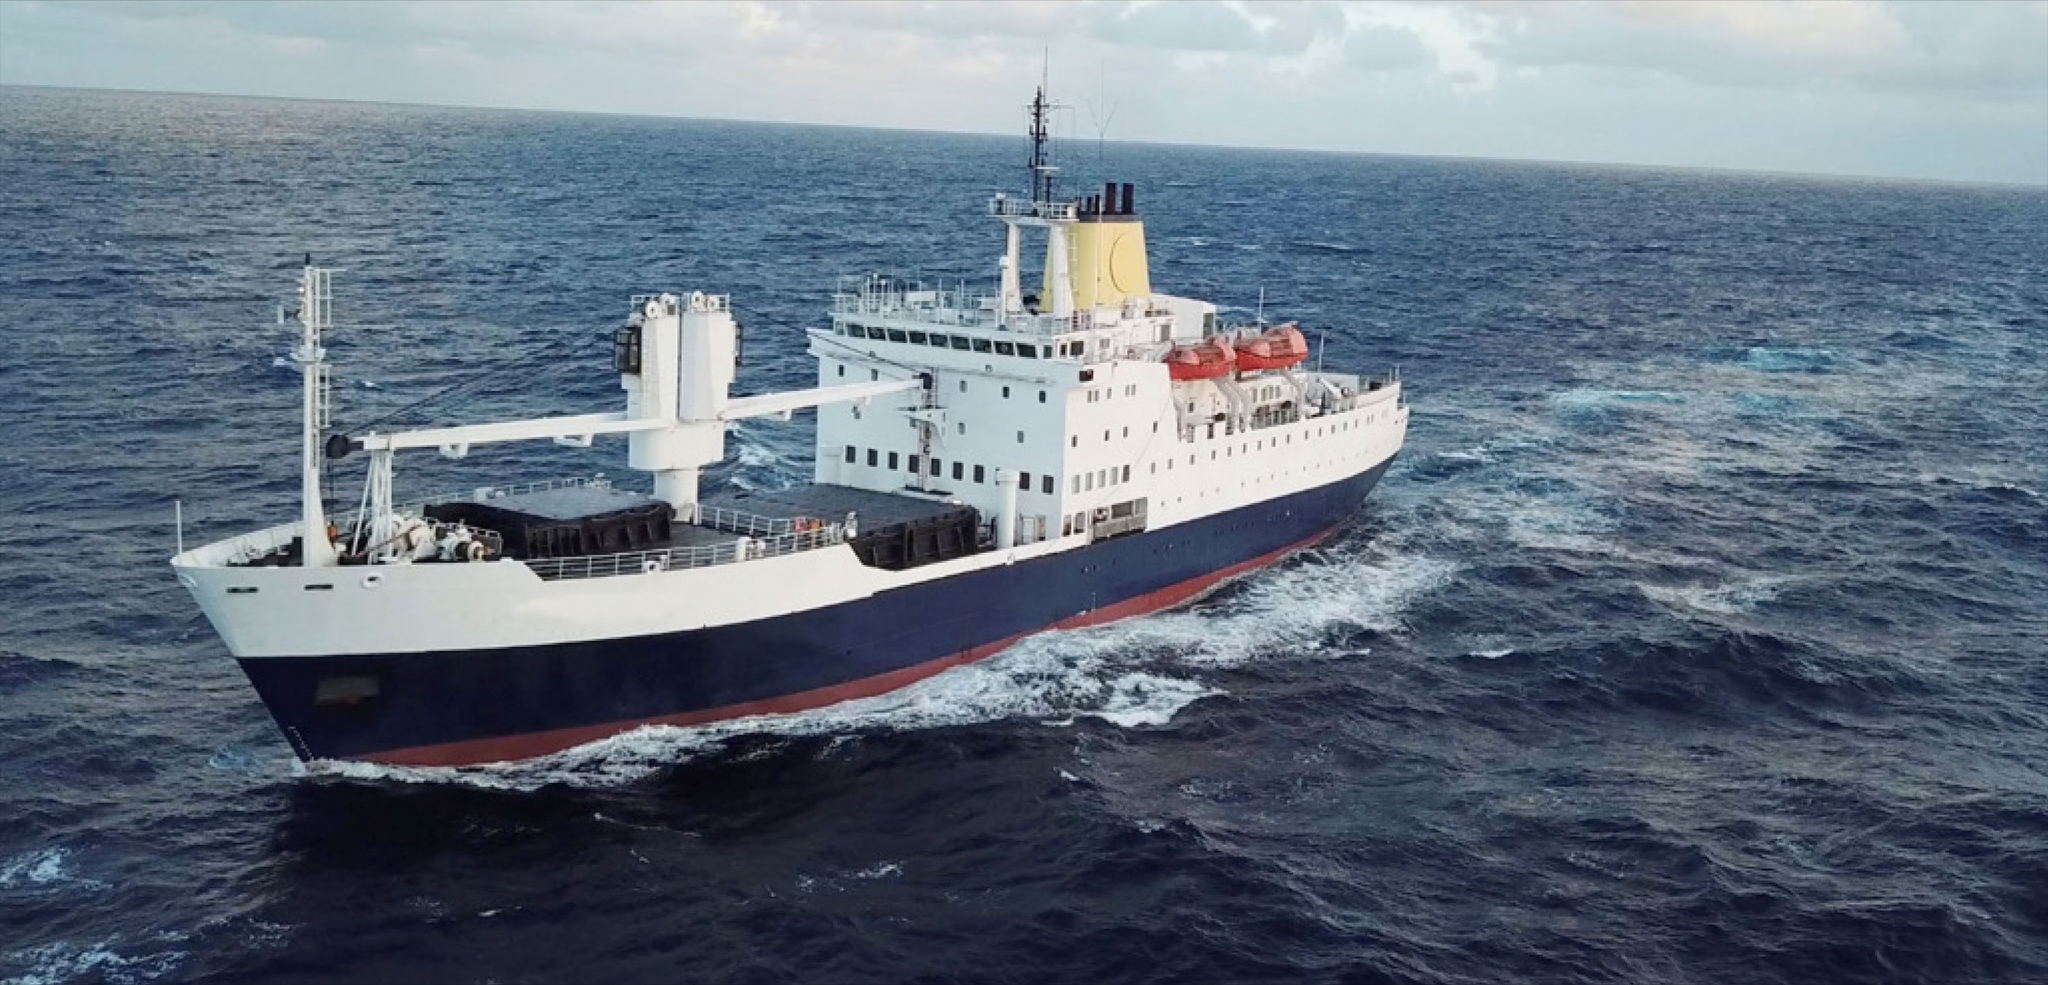 The RMS St Helena: Extreme E: the off-road race series on an eco trip